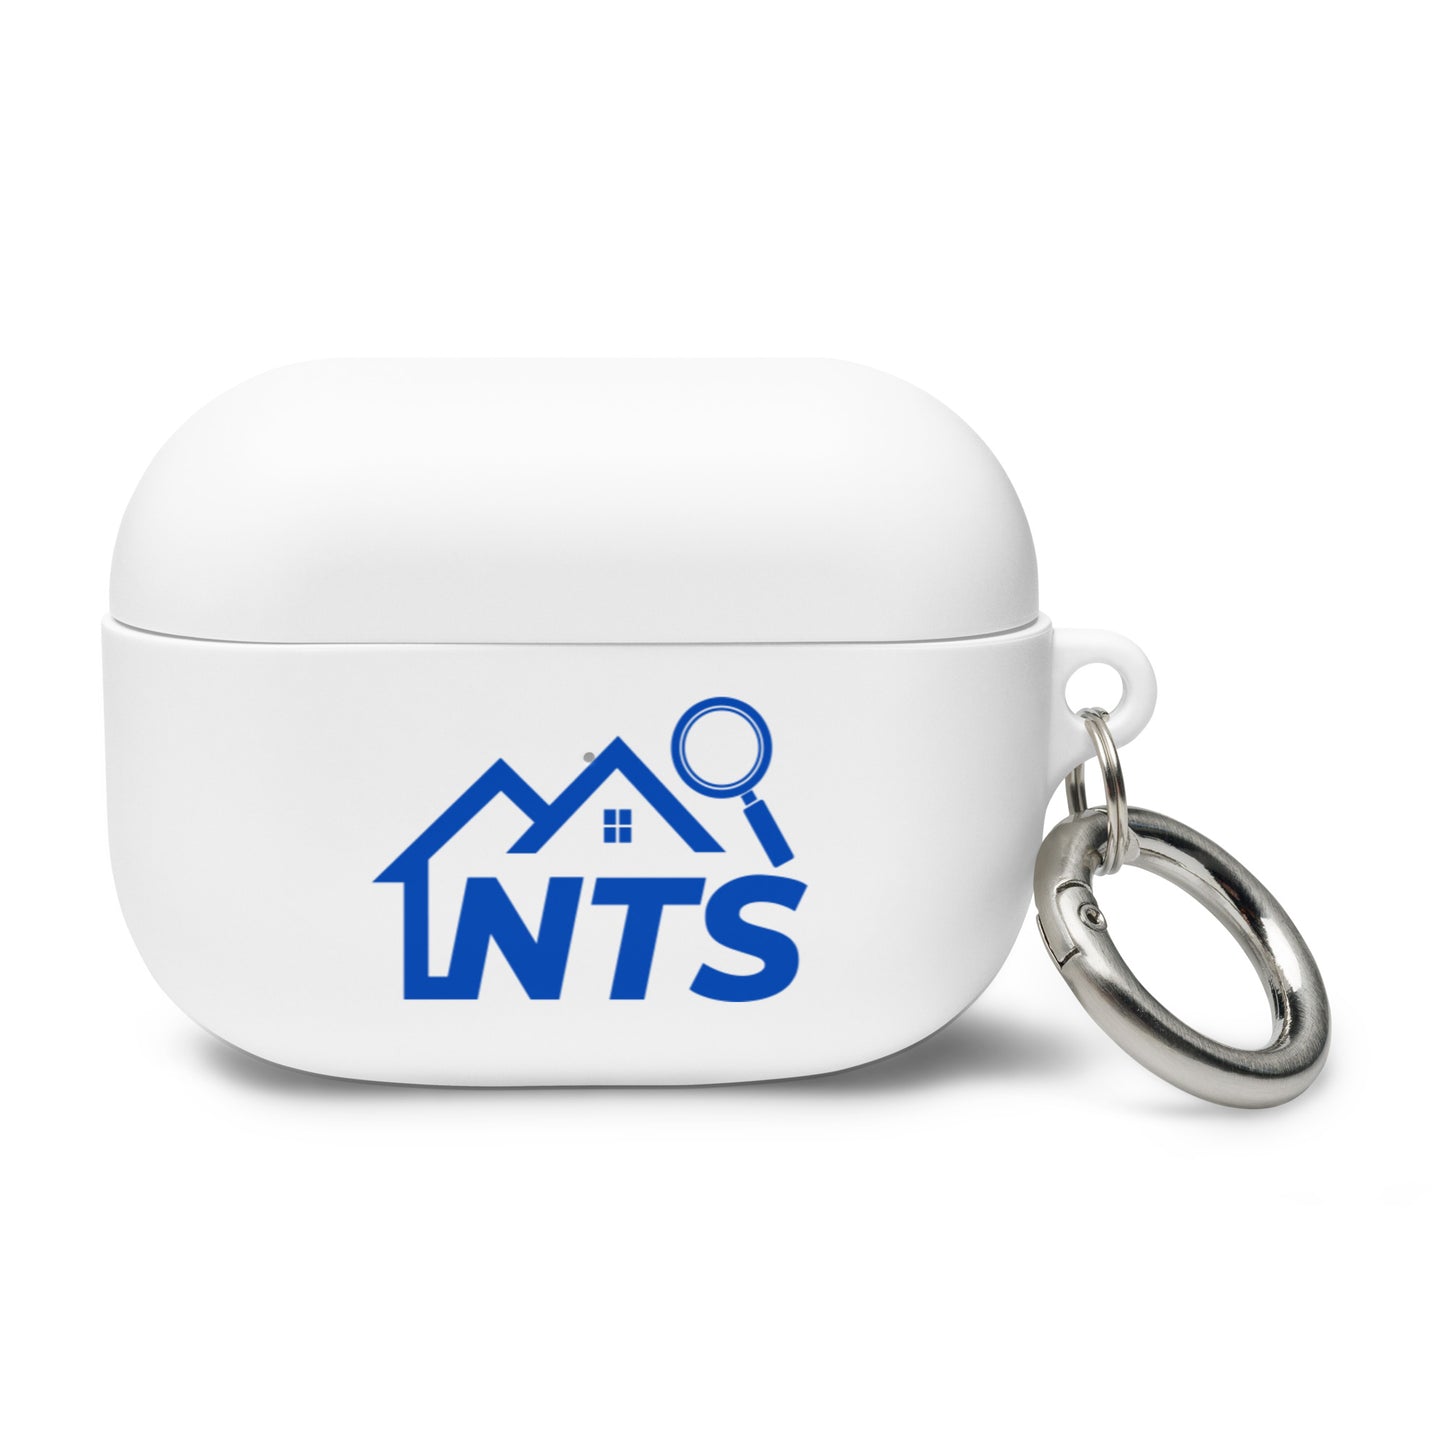 NTS AirPods case